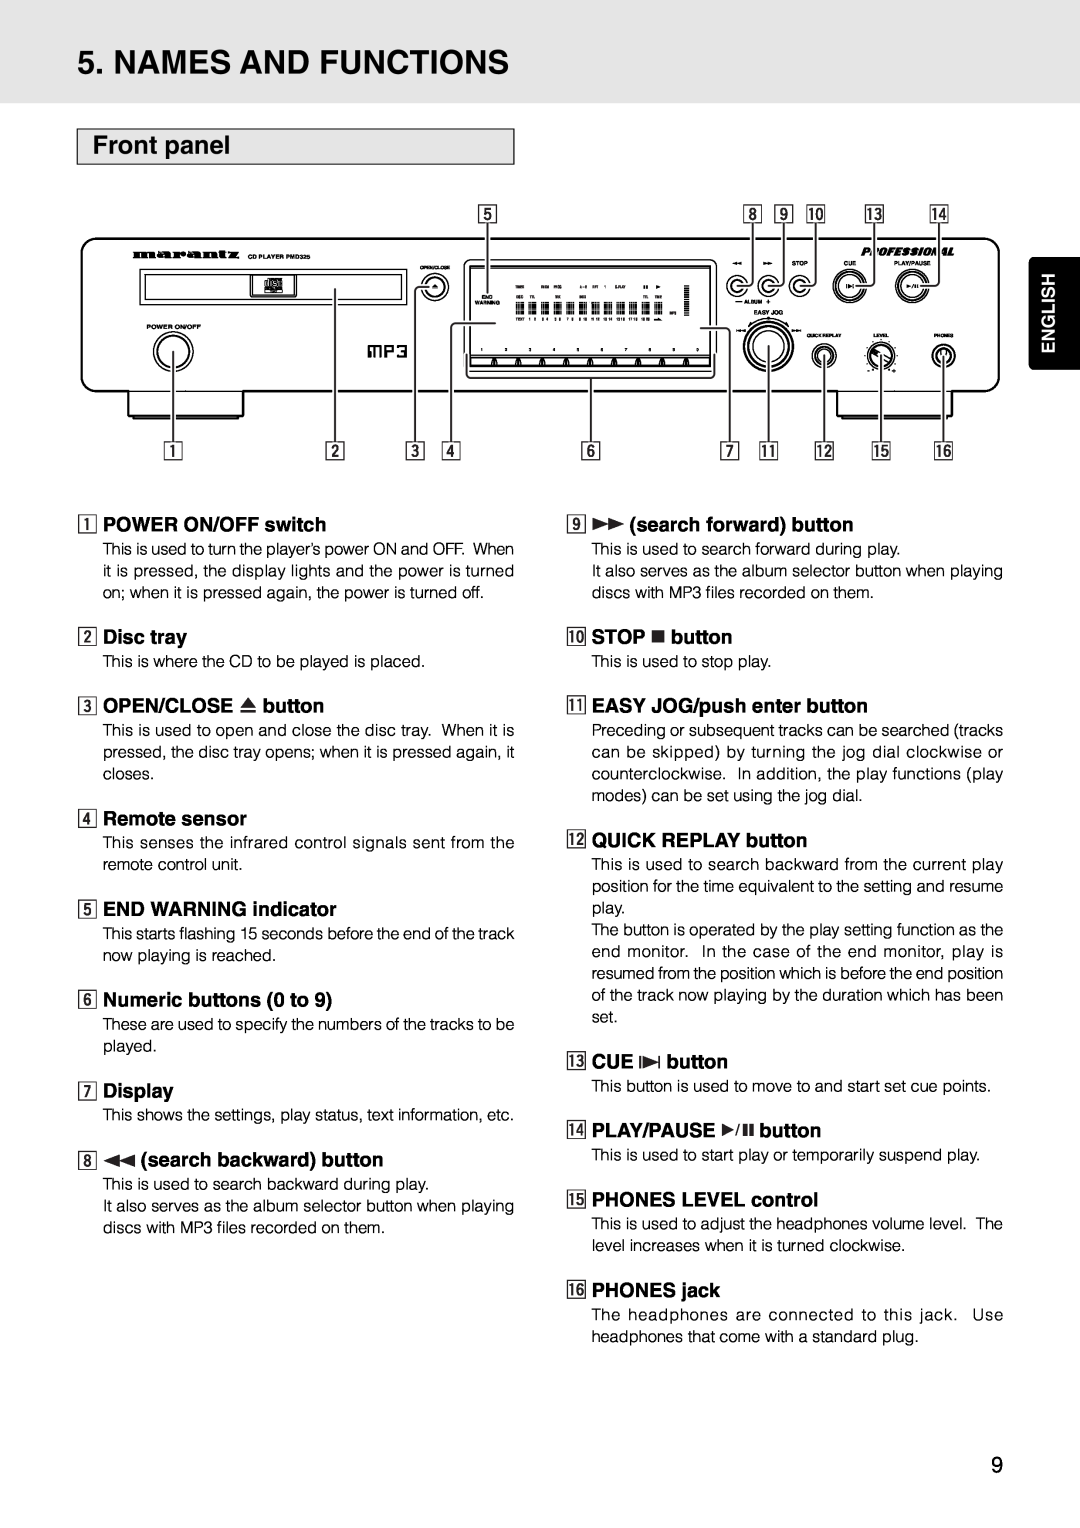 Marantz PMD325 manual Names And Functions, Front panel 